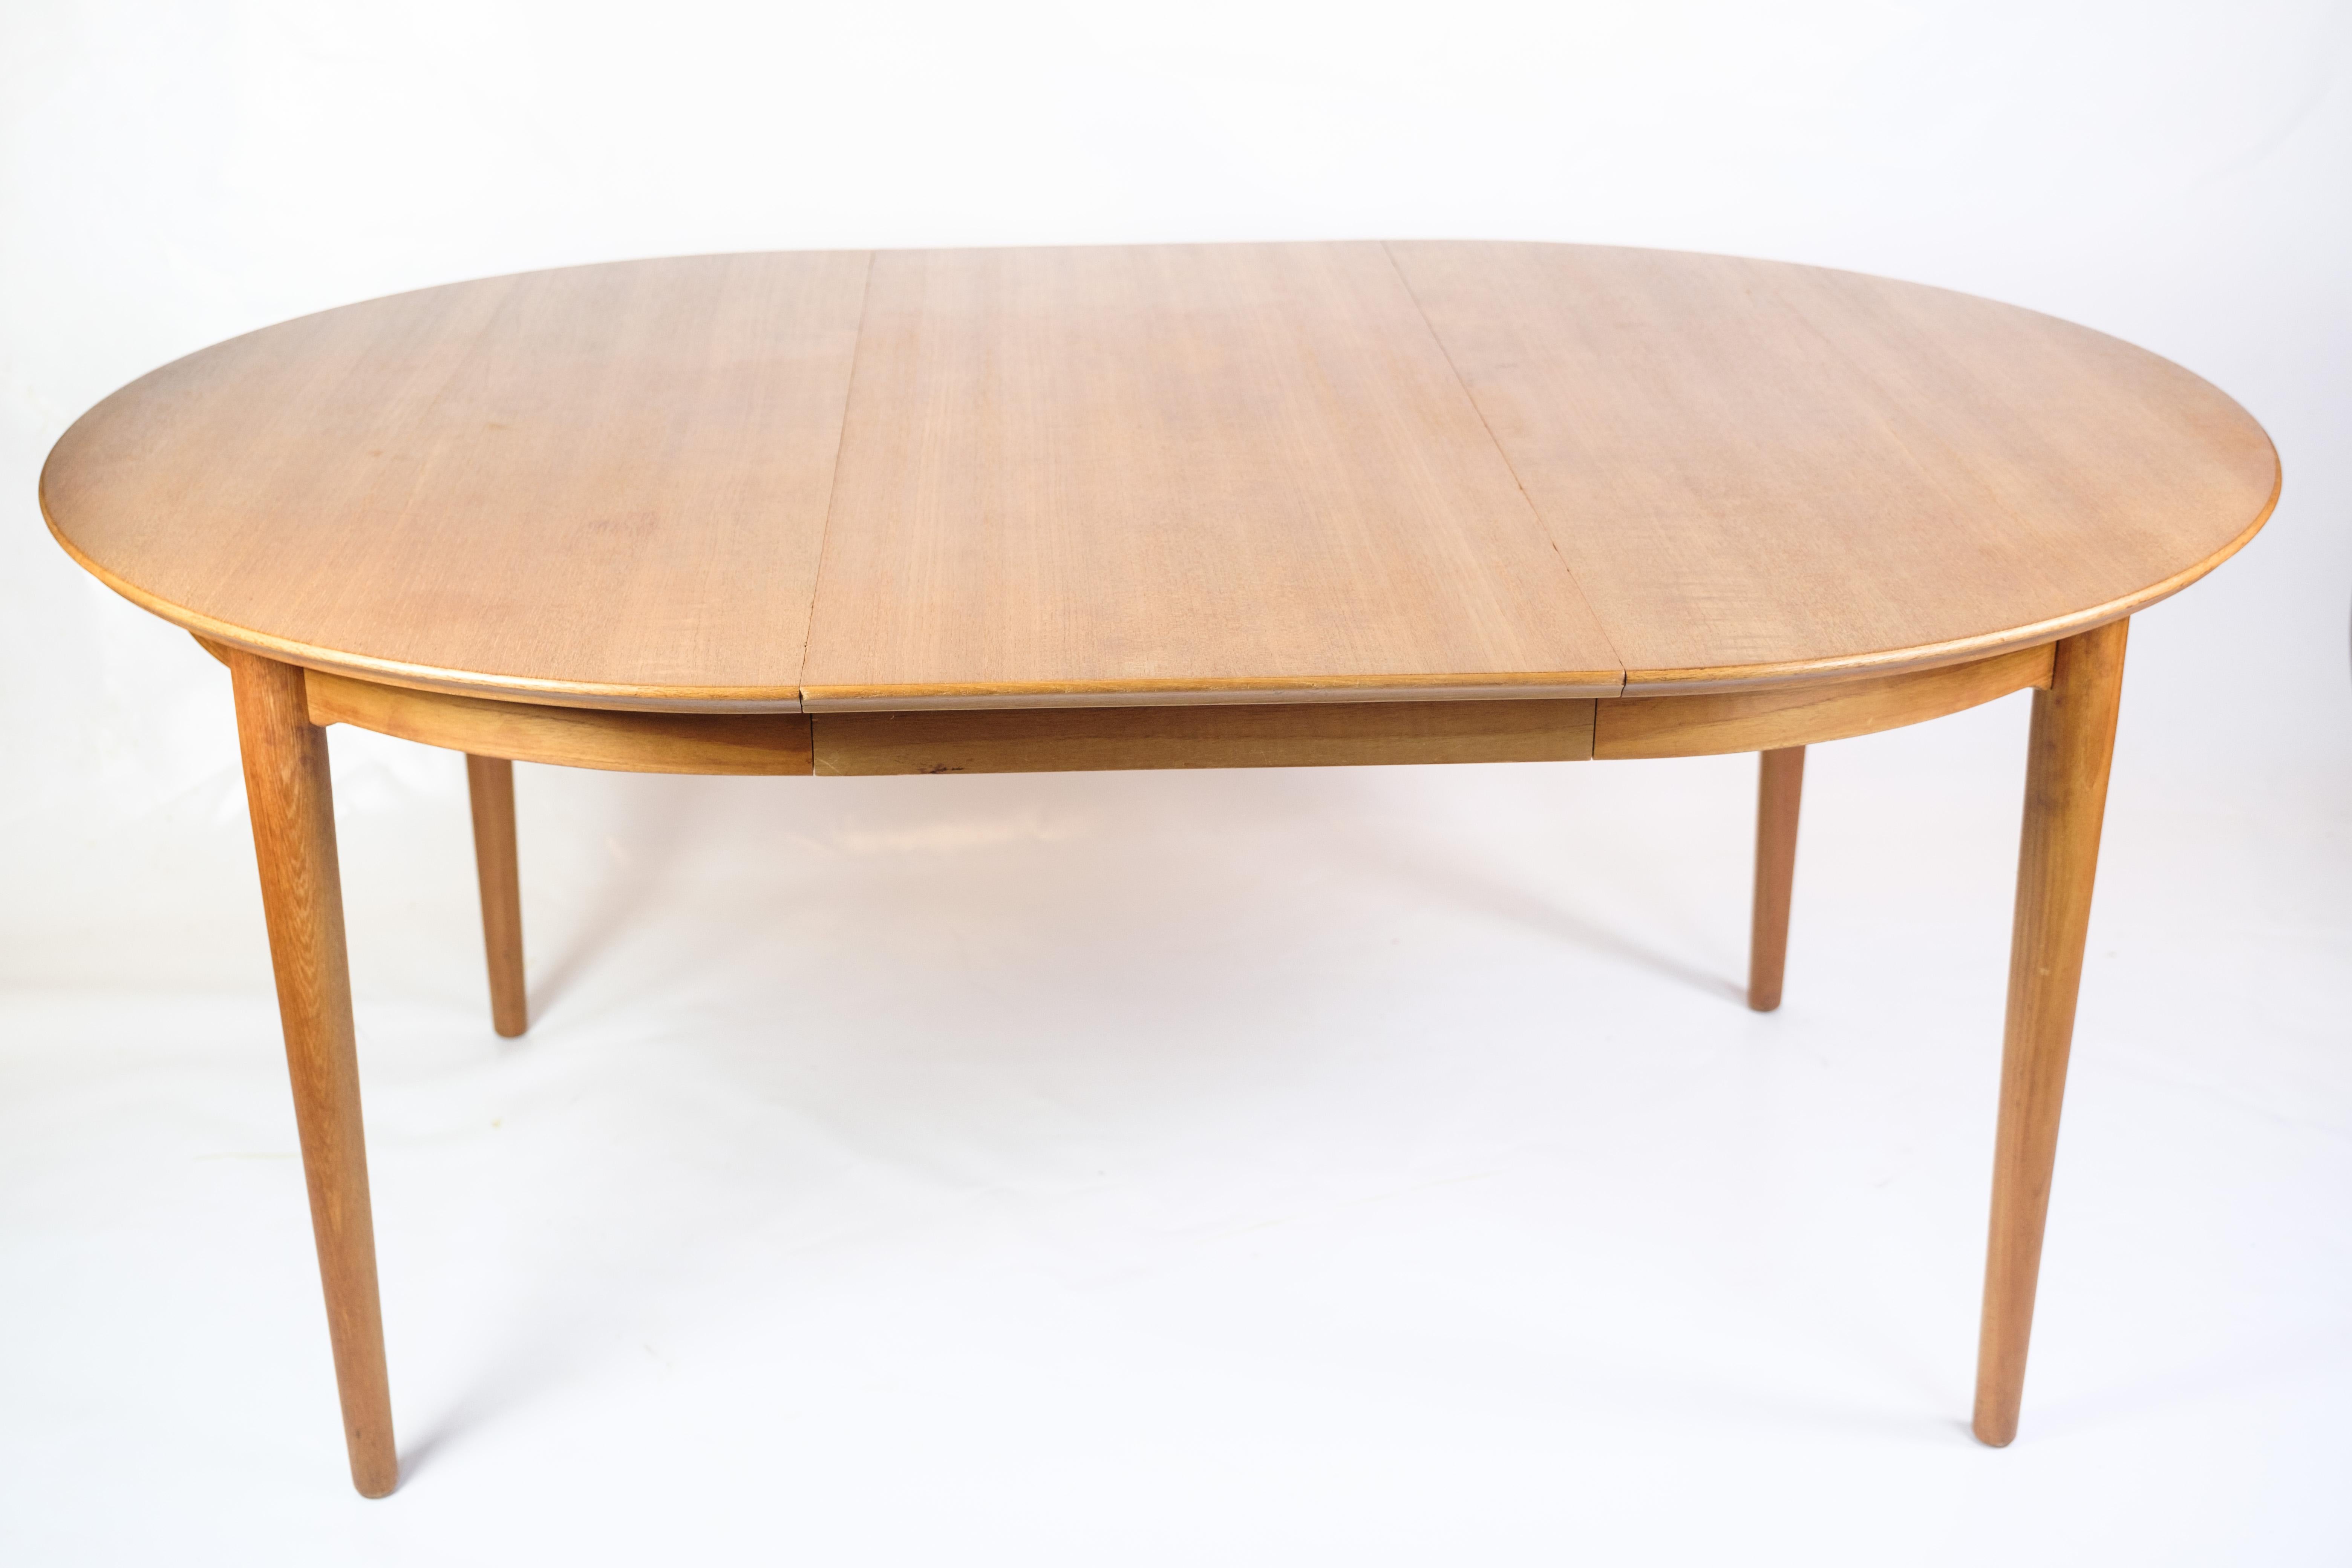 Dining Room Table Made In Teak With Extensions By Arne Vodder From 1960s For Sale 2